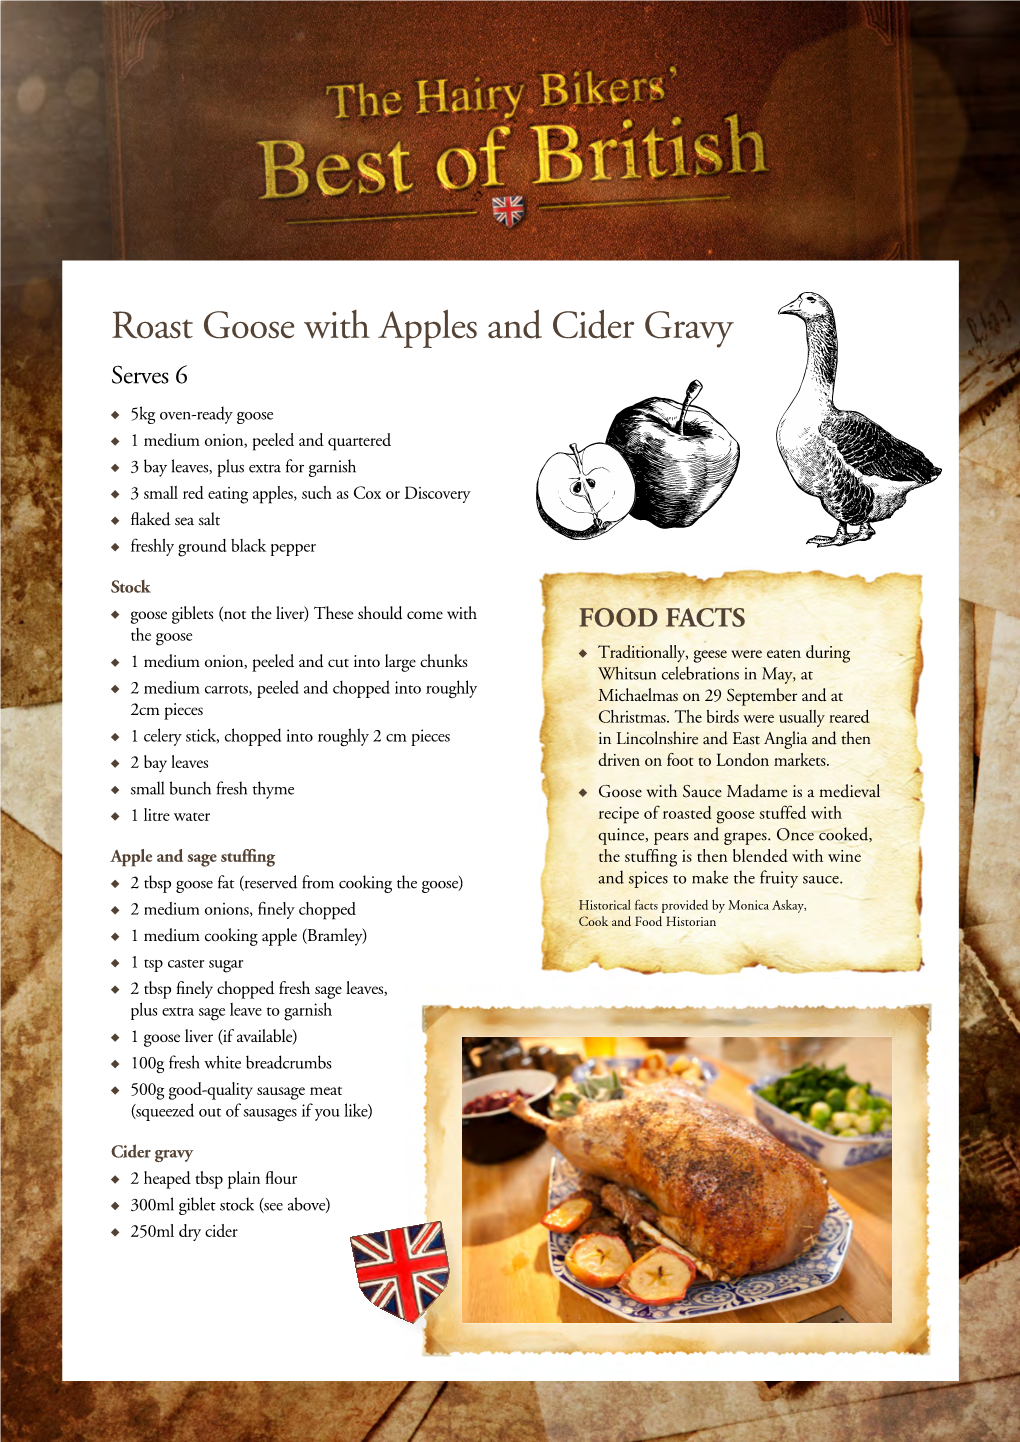 Roast Goose with Apples and Cider Gravy